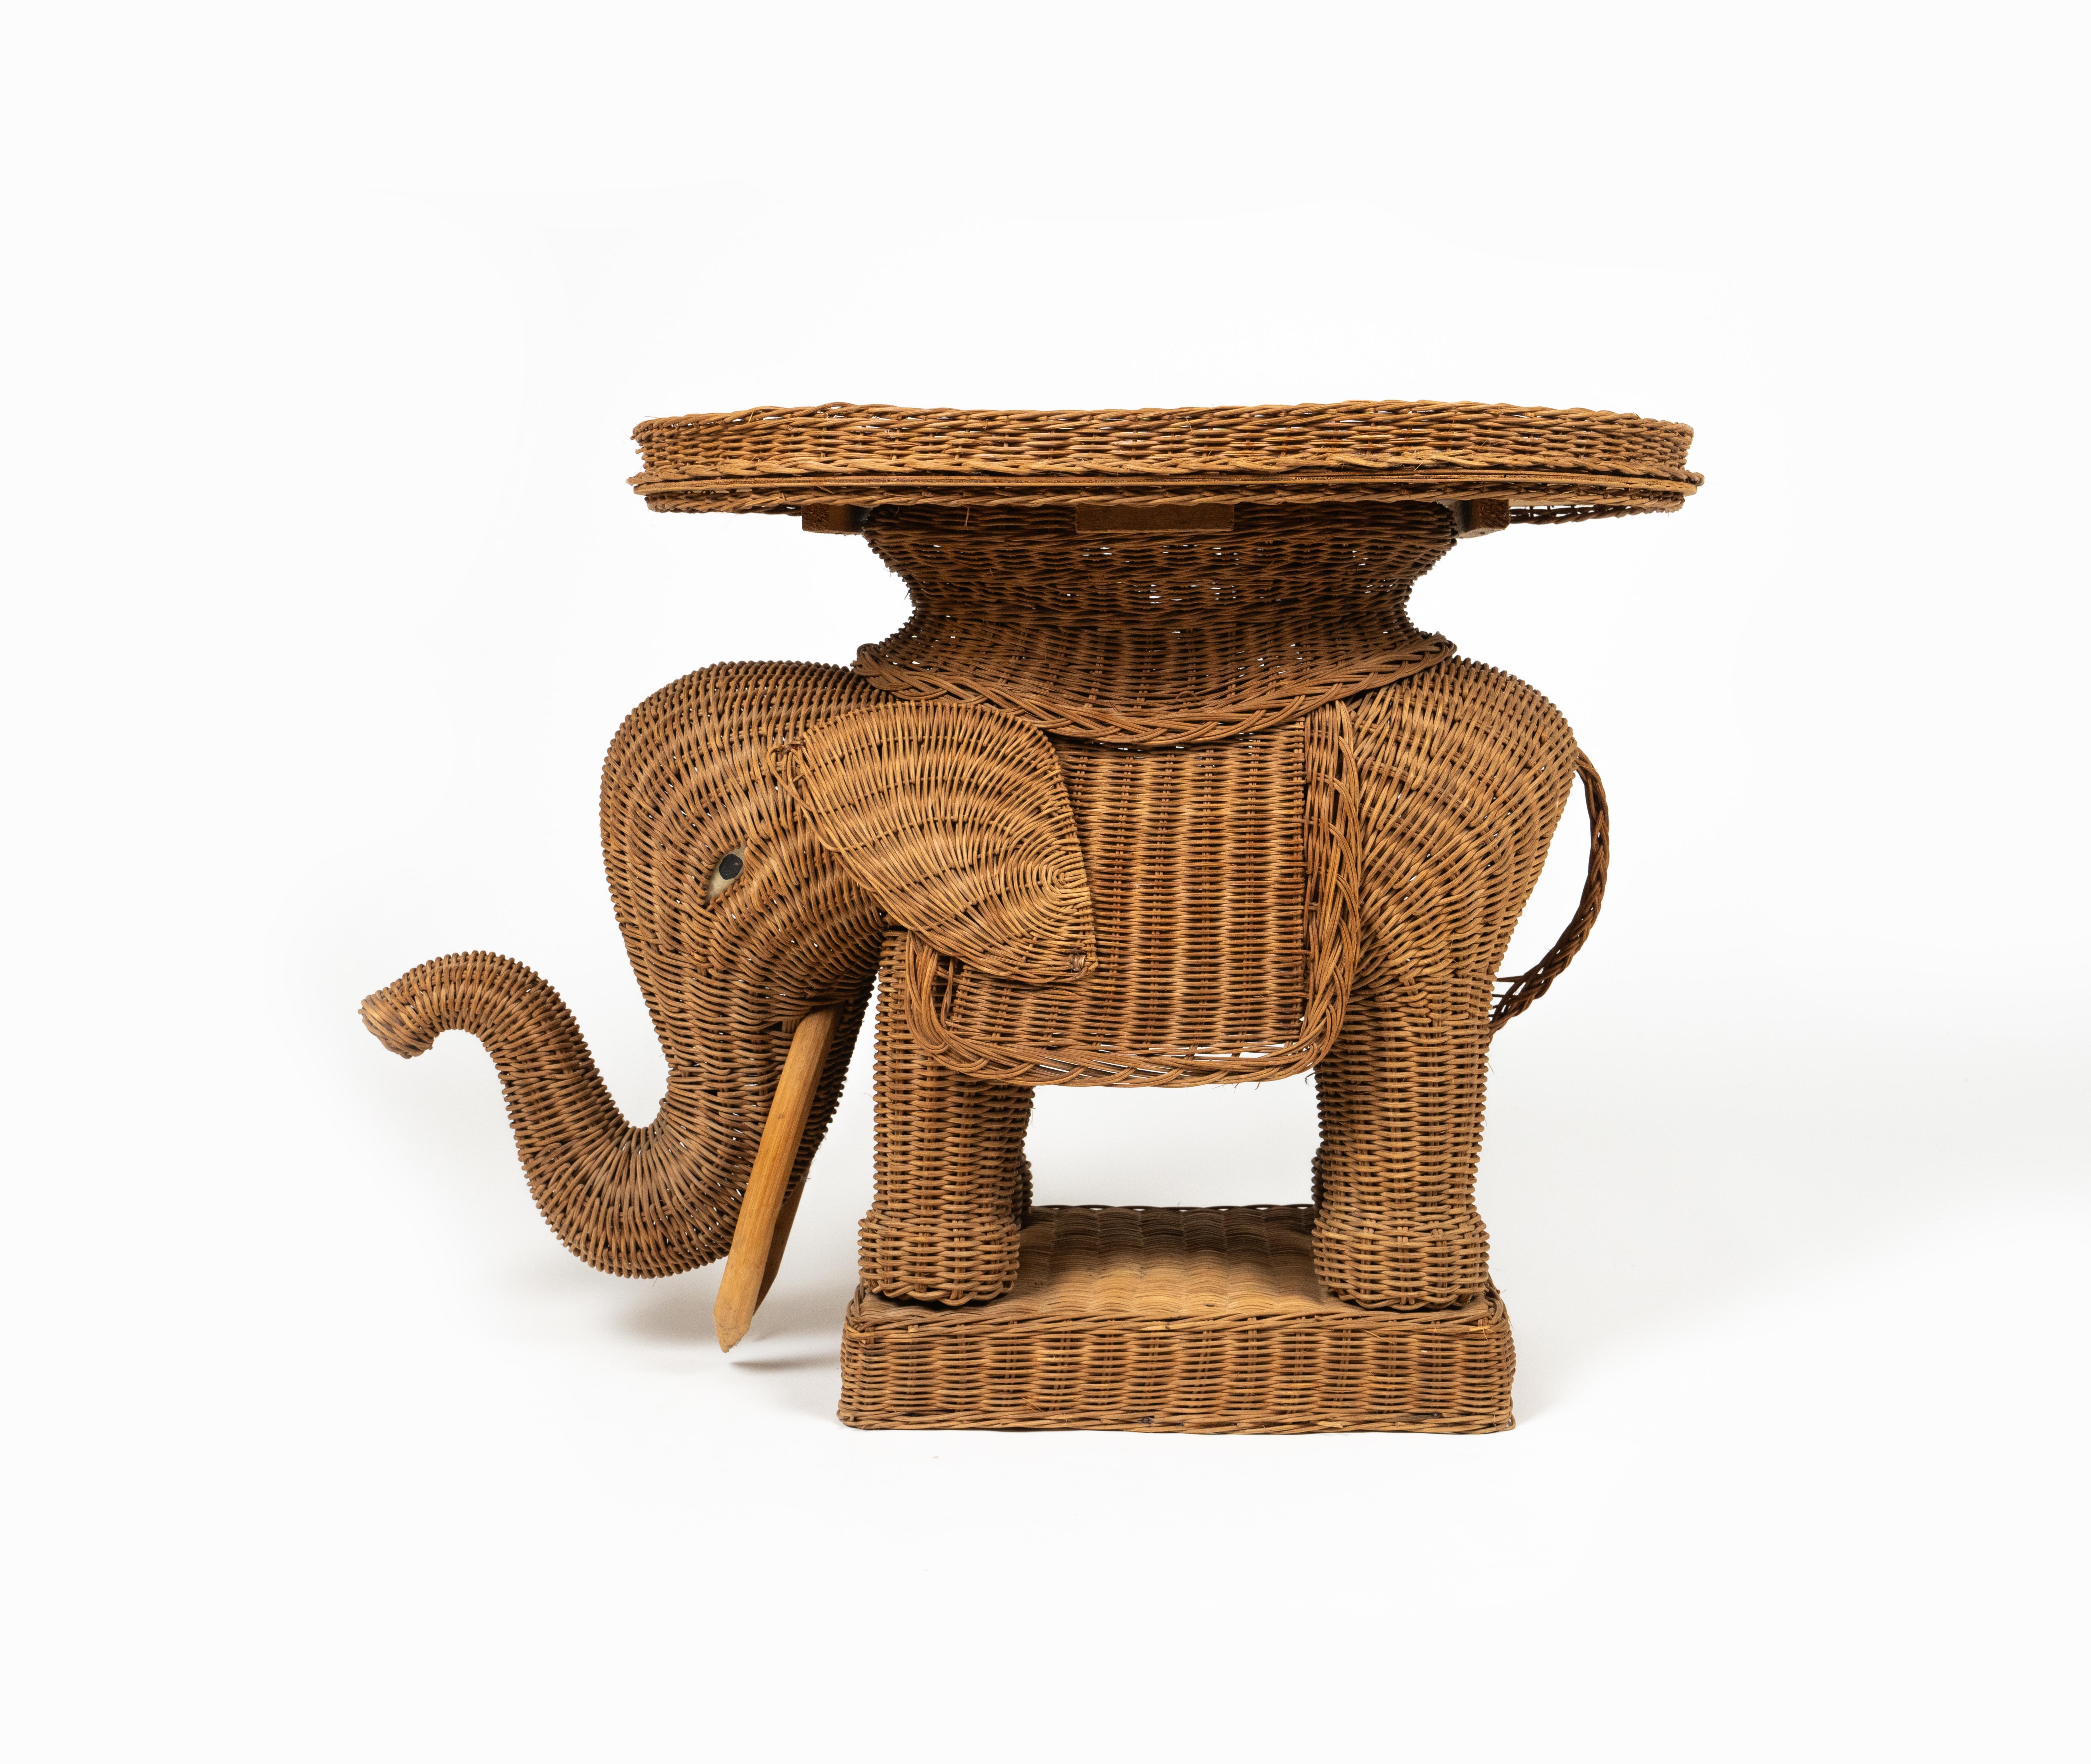 Mid-20th Century Rattan & Wicker Elephant Side Coffee Table Vivai Del Sud Style, Italy, 1960s For Sale